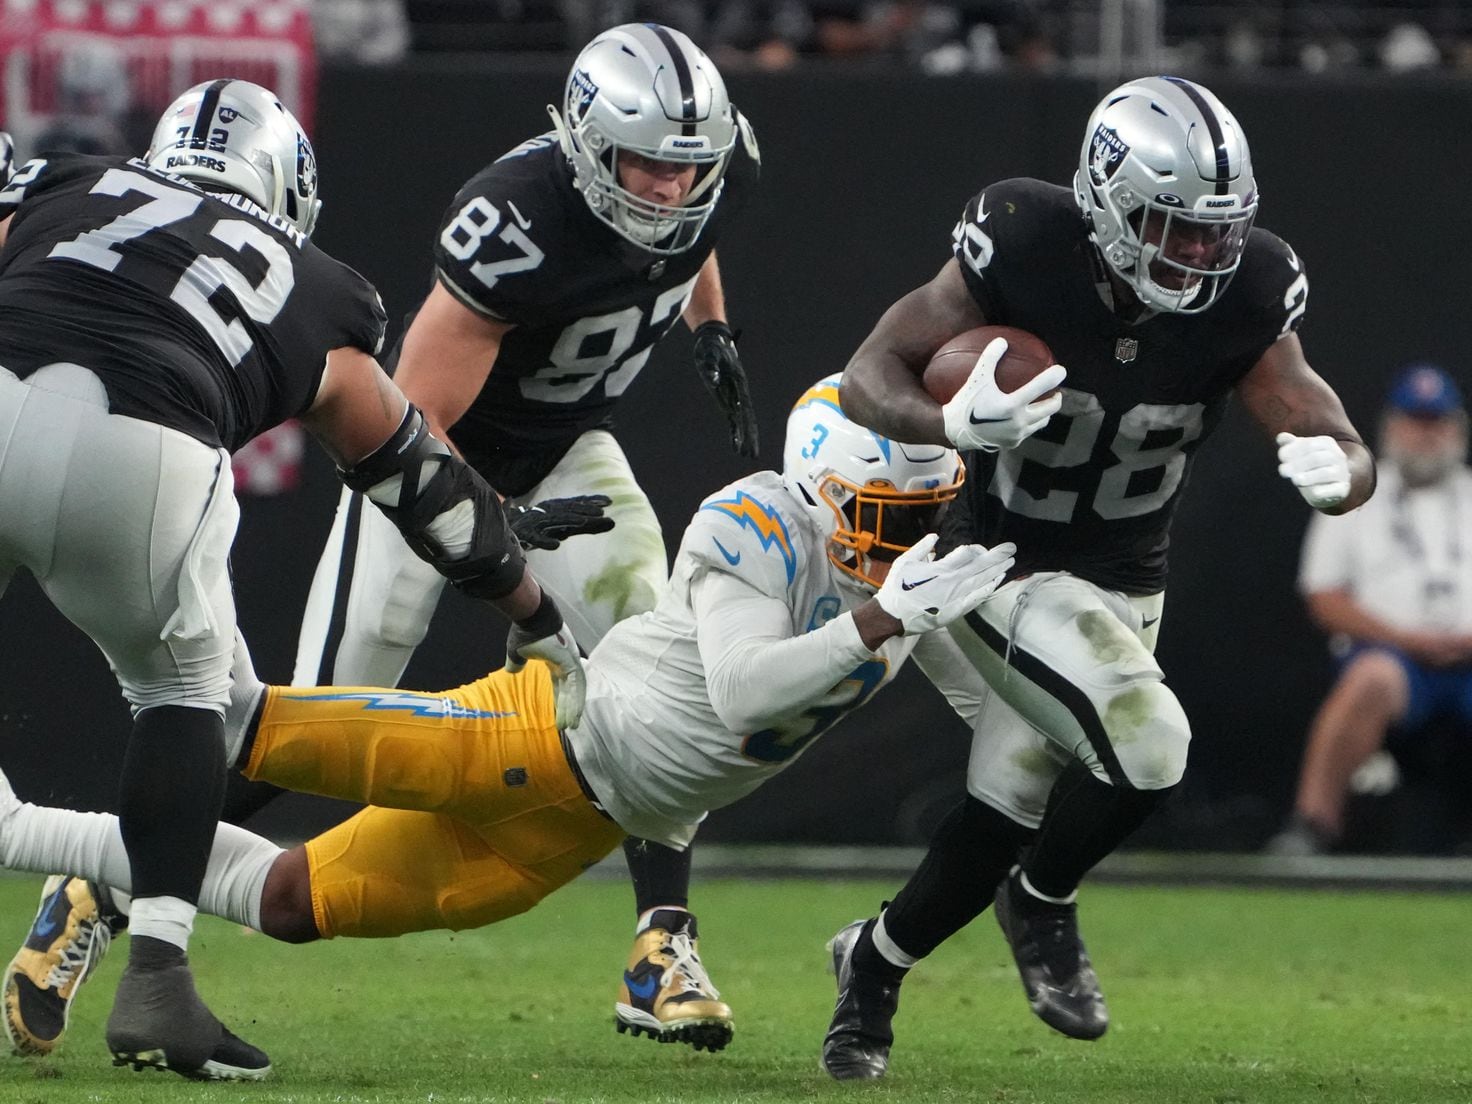 How to watch Las Vegas Raiders at Los Angeles Rams on Thursday